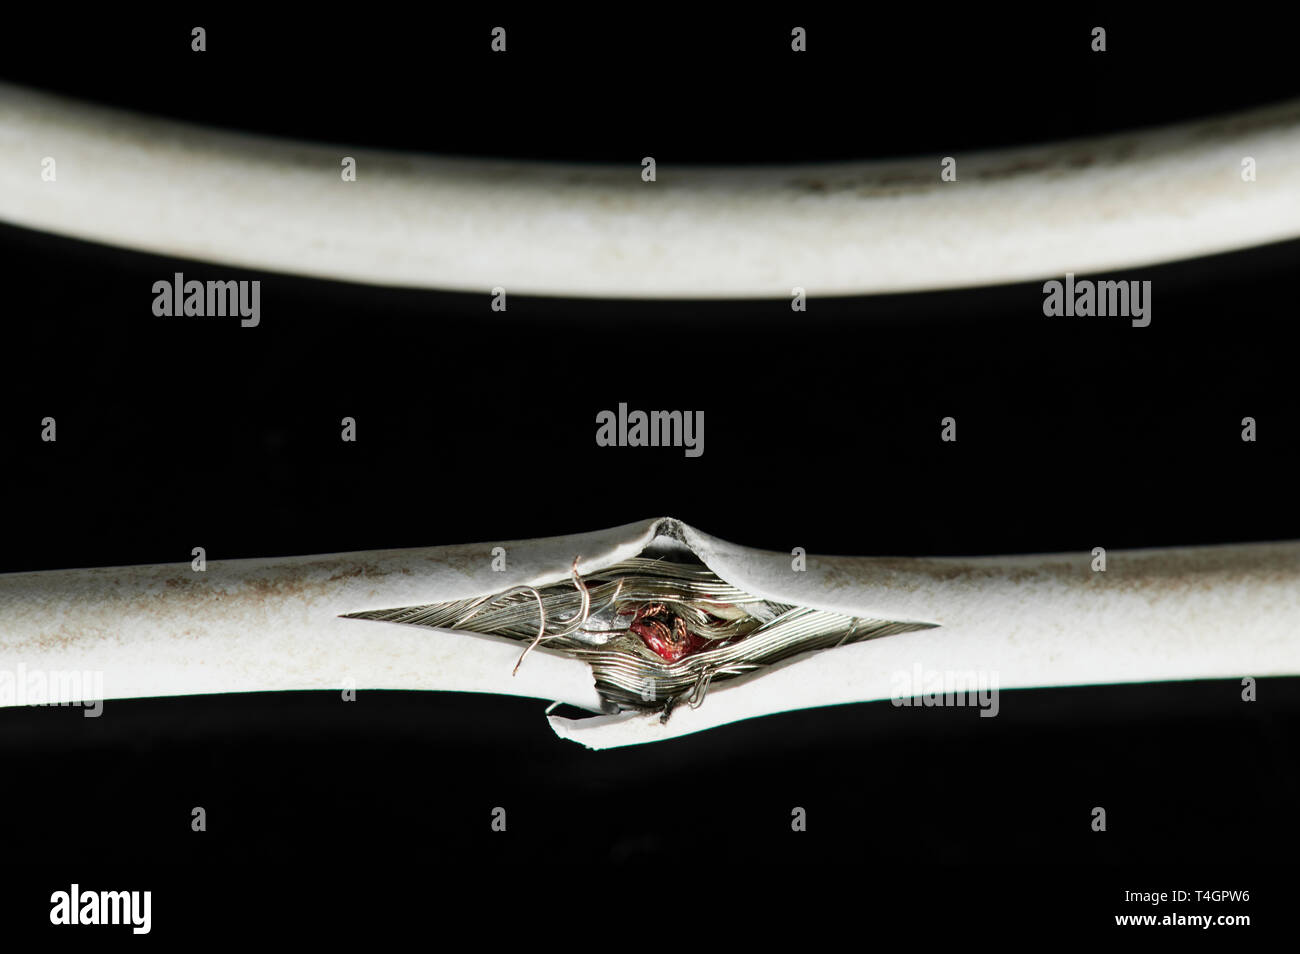 Damaged of white wire cable isolated on black background Stock Photo